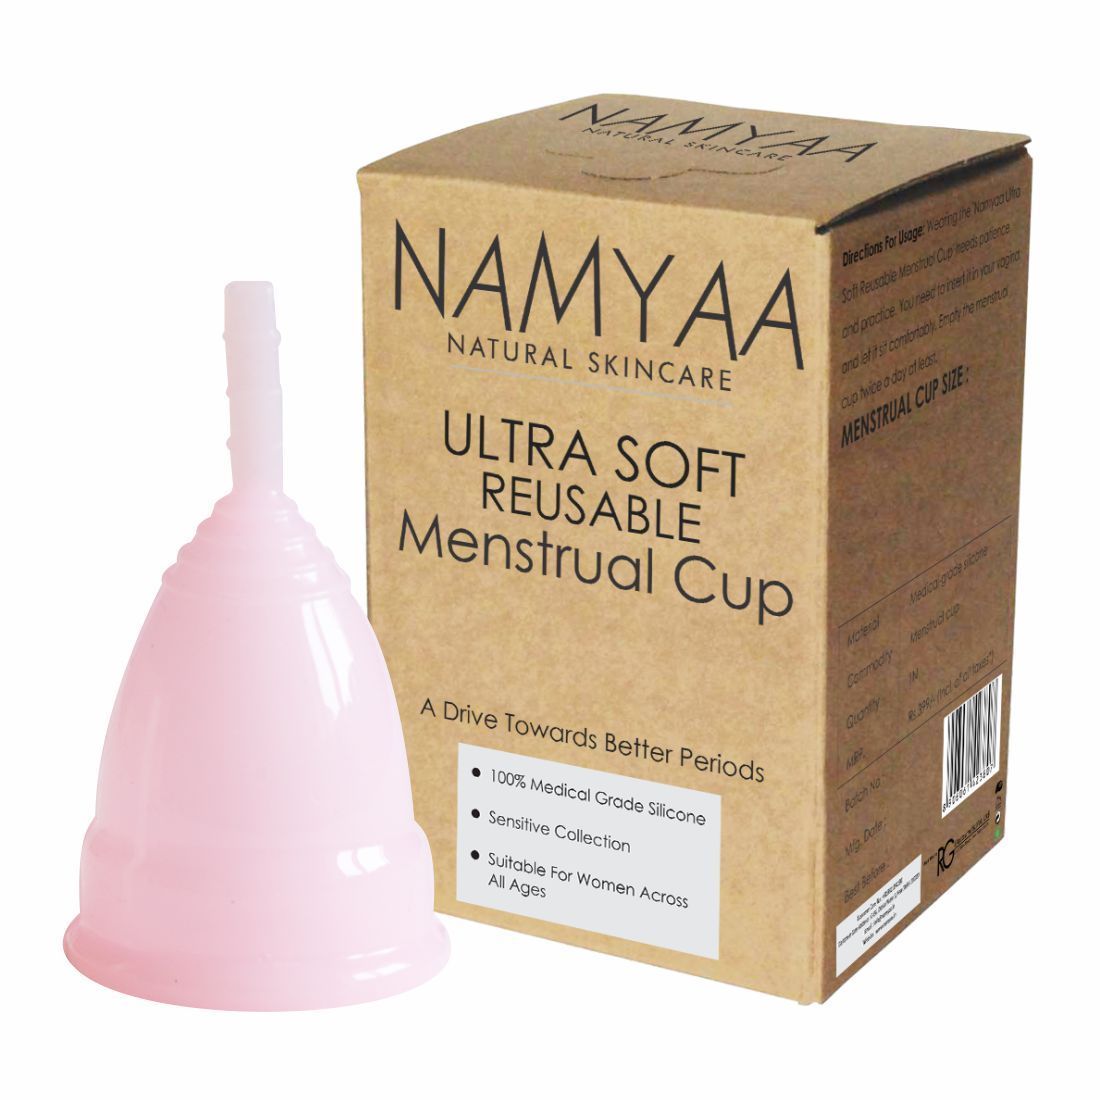 Buy Namyaa Ultra Soft Reusable Menstrual Cup Large, 1 Count Online